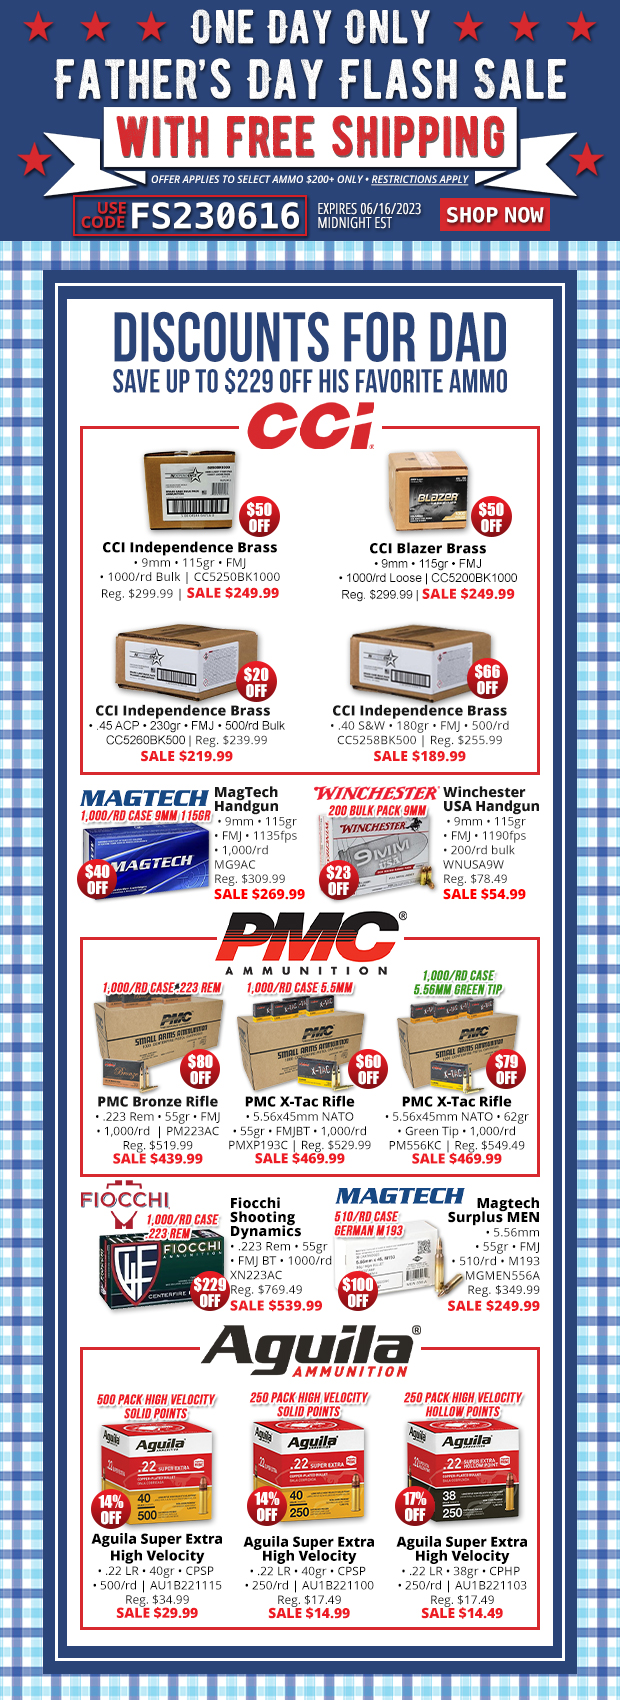 One Day Only Father's Day Flash Sale on Select Ammo with Free Shipping  Restrictions Apply